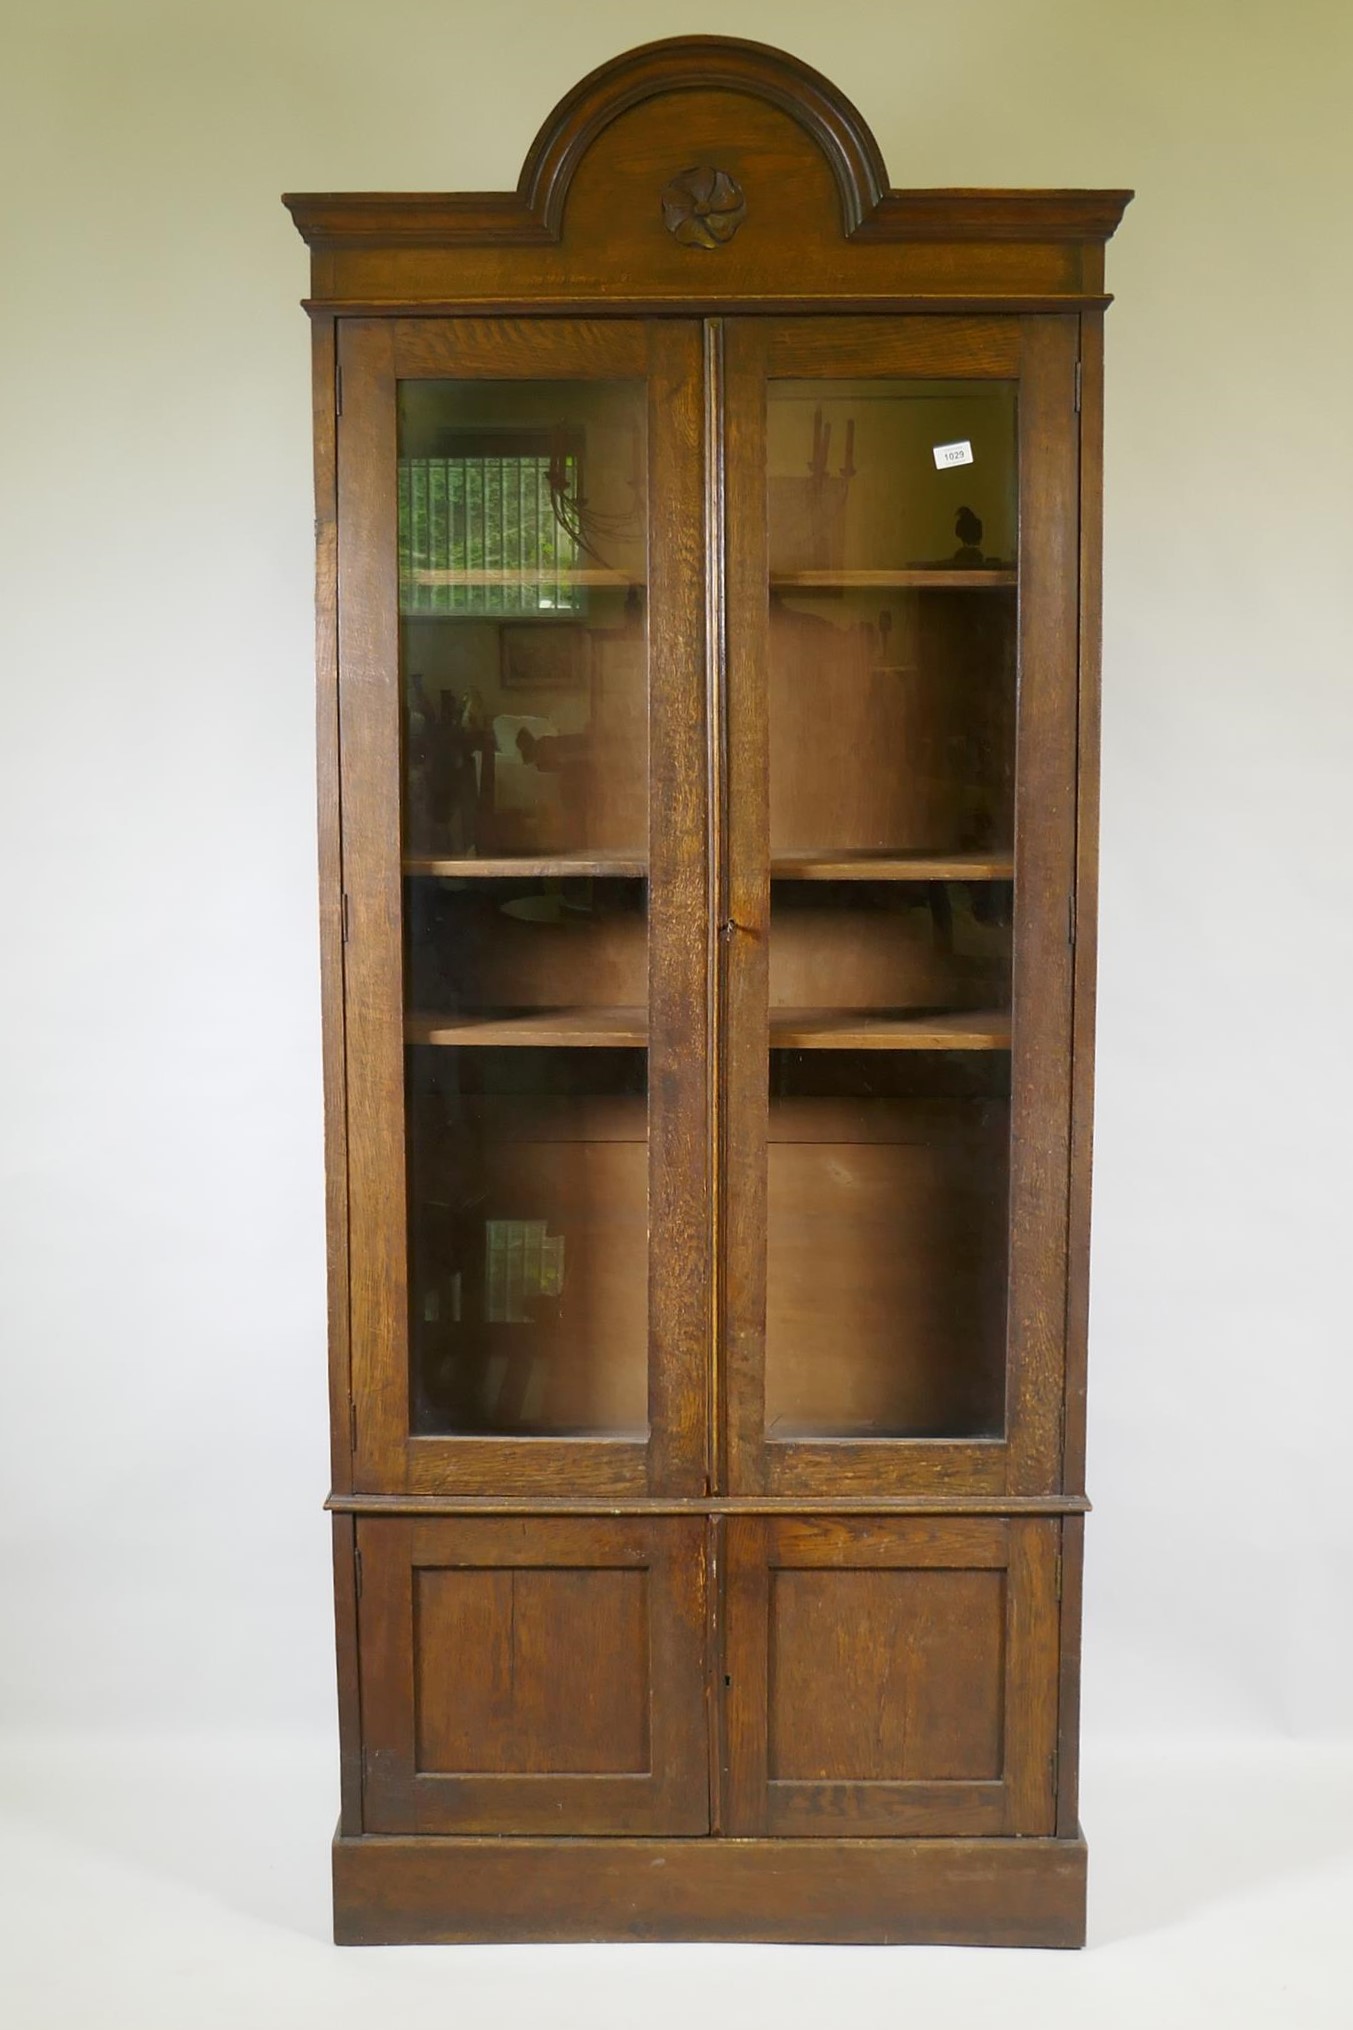 A C19th oak cabinet with arched top and two glazed doors over two cupboards, 90 x 30 x 210cm